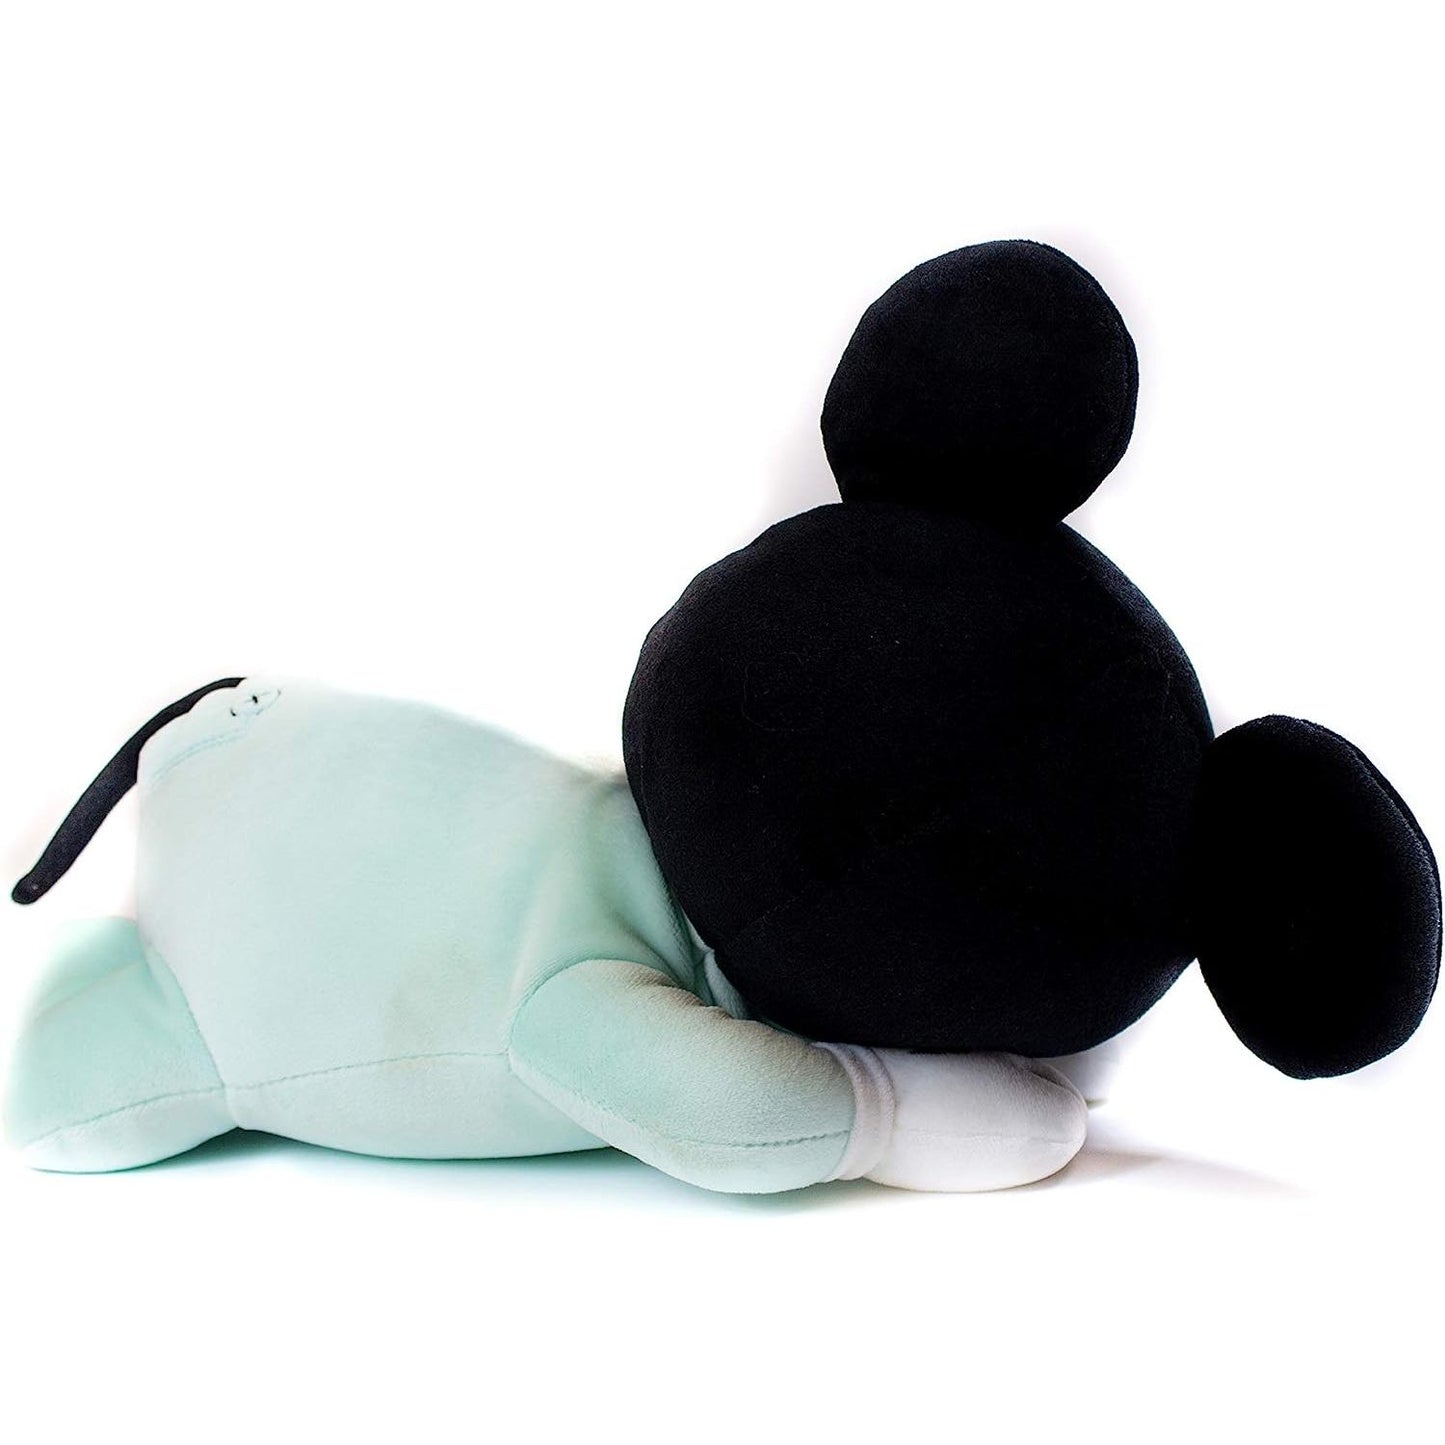 Mickey mouse back view of sleeping - Heretoserveyou